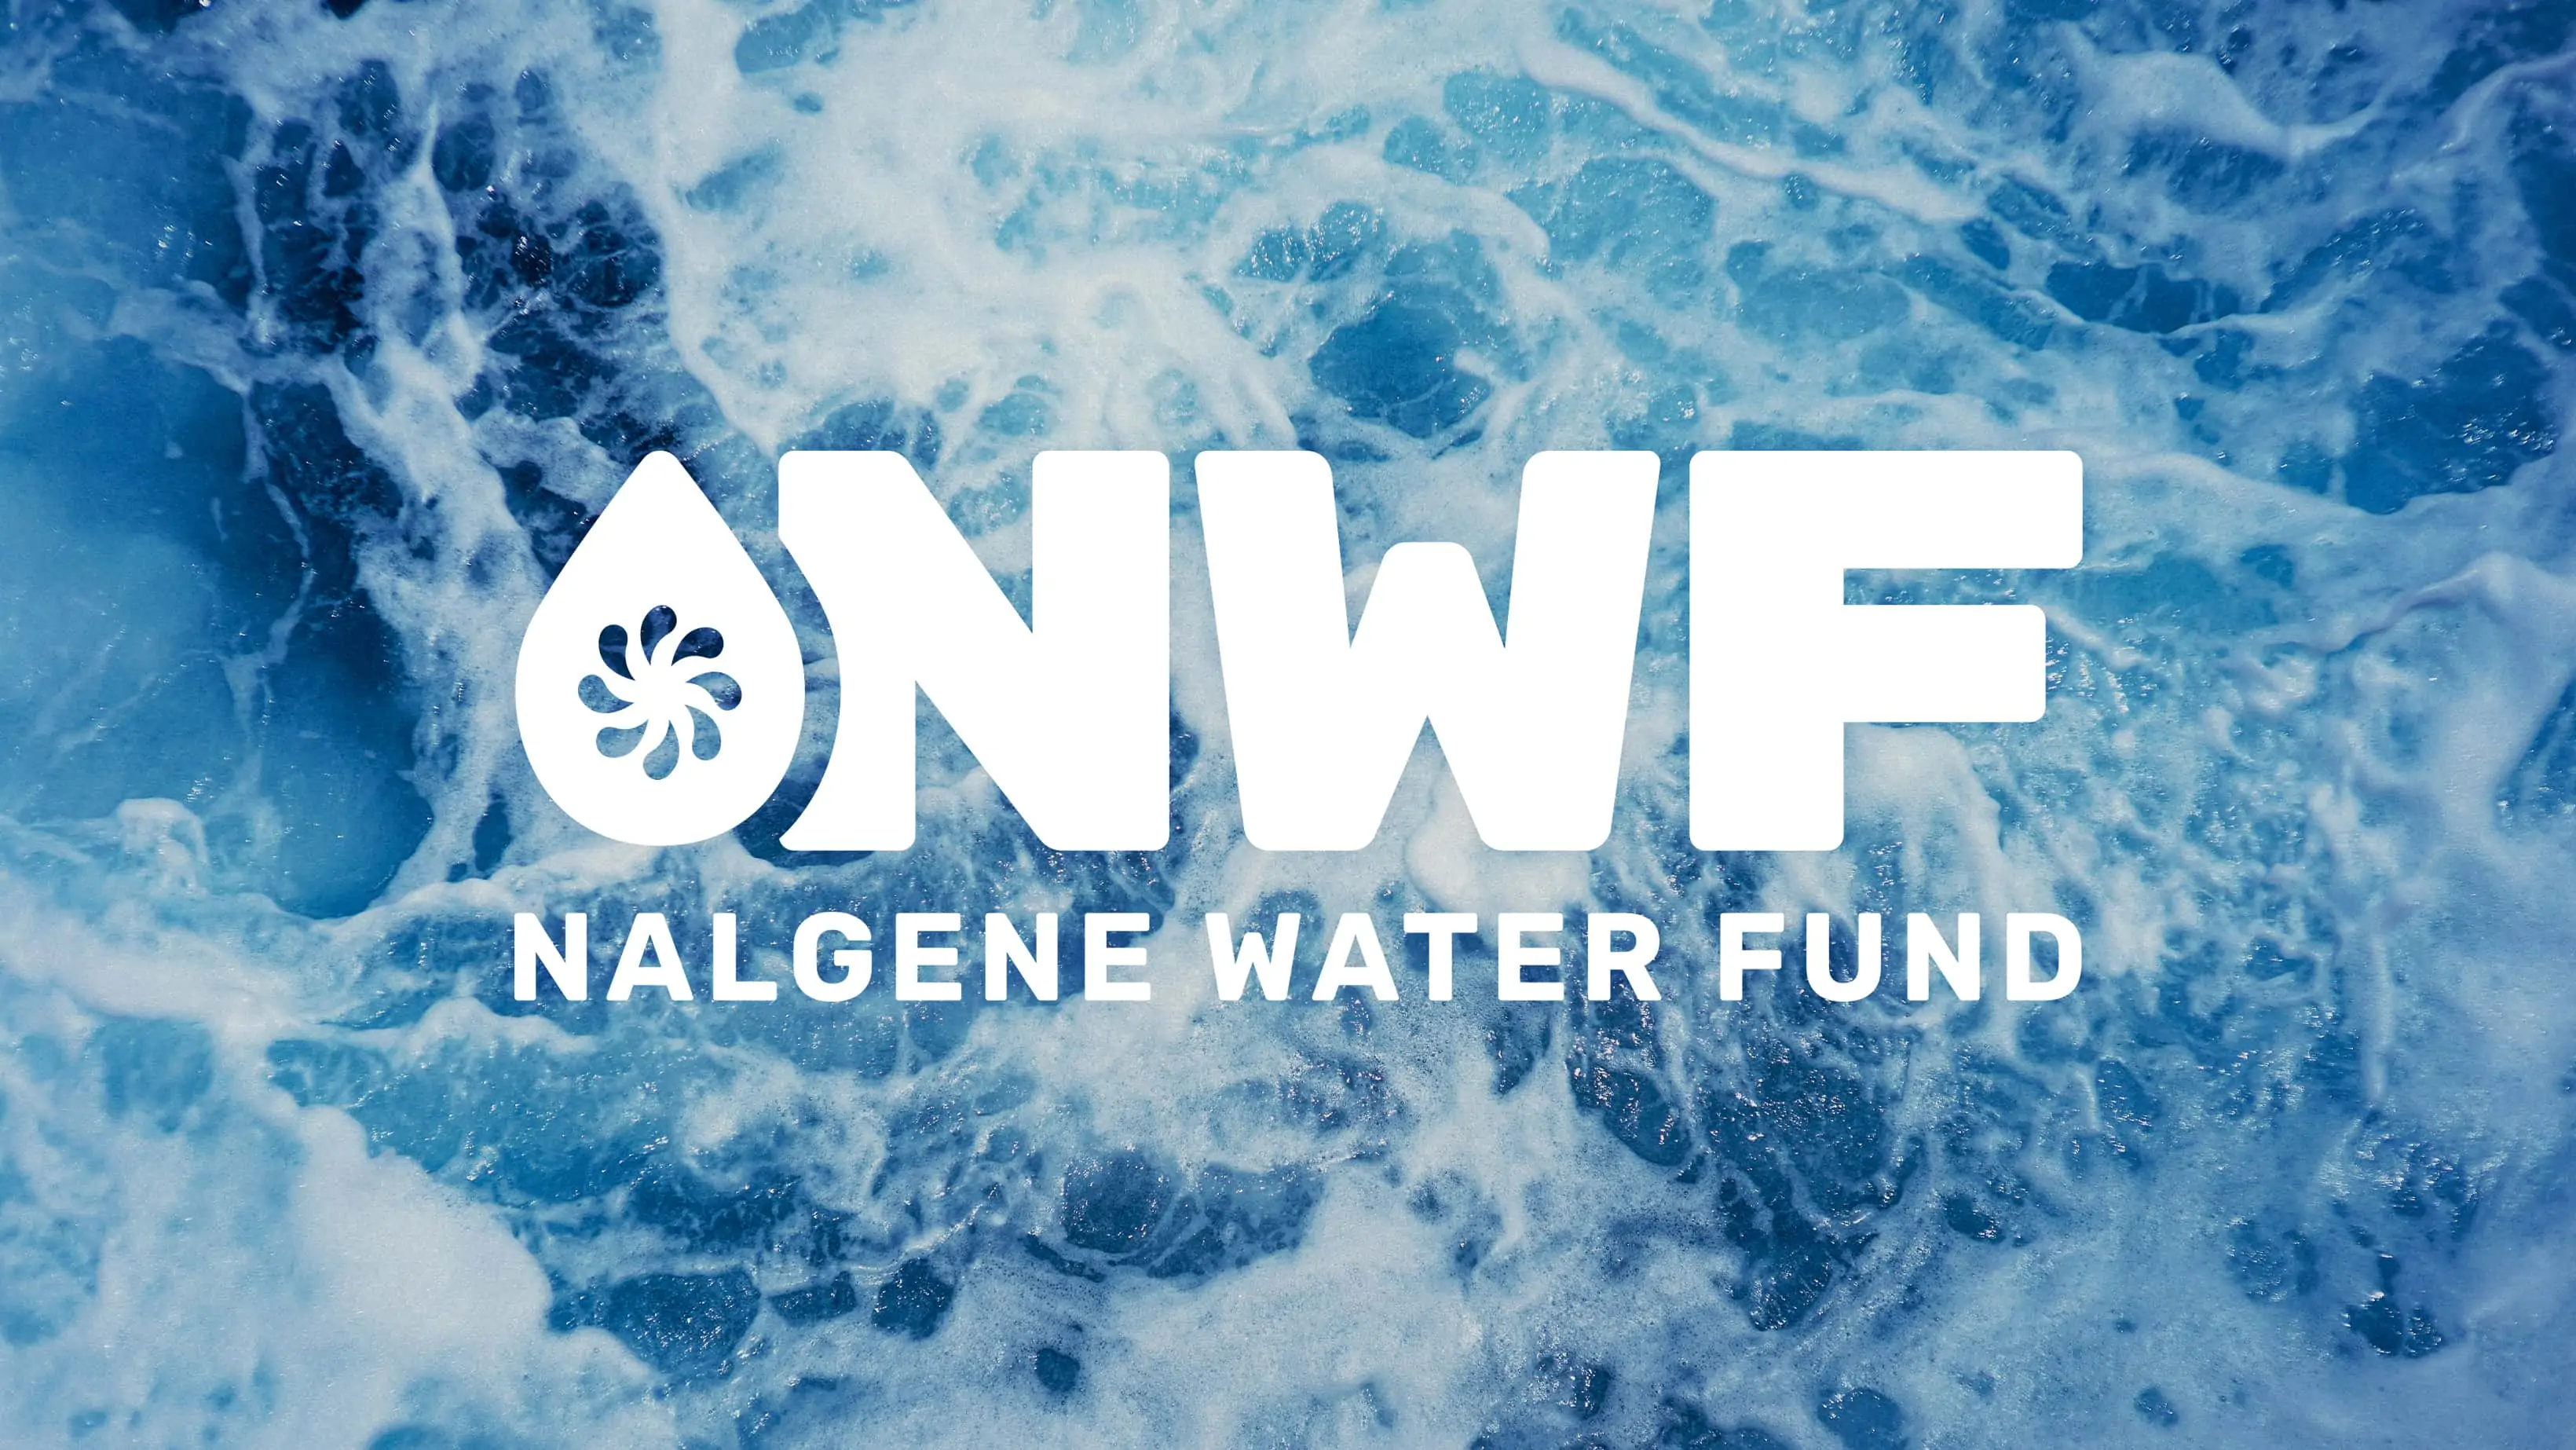 nalgene water fund logo with water in the background